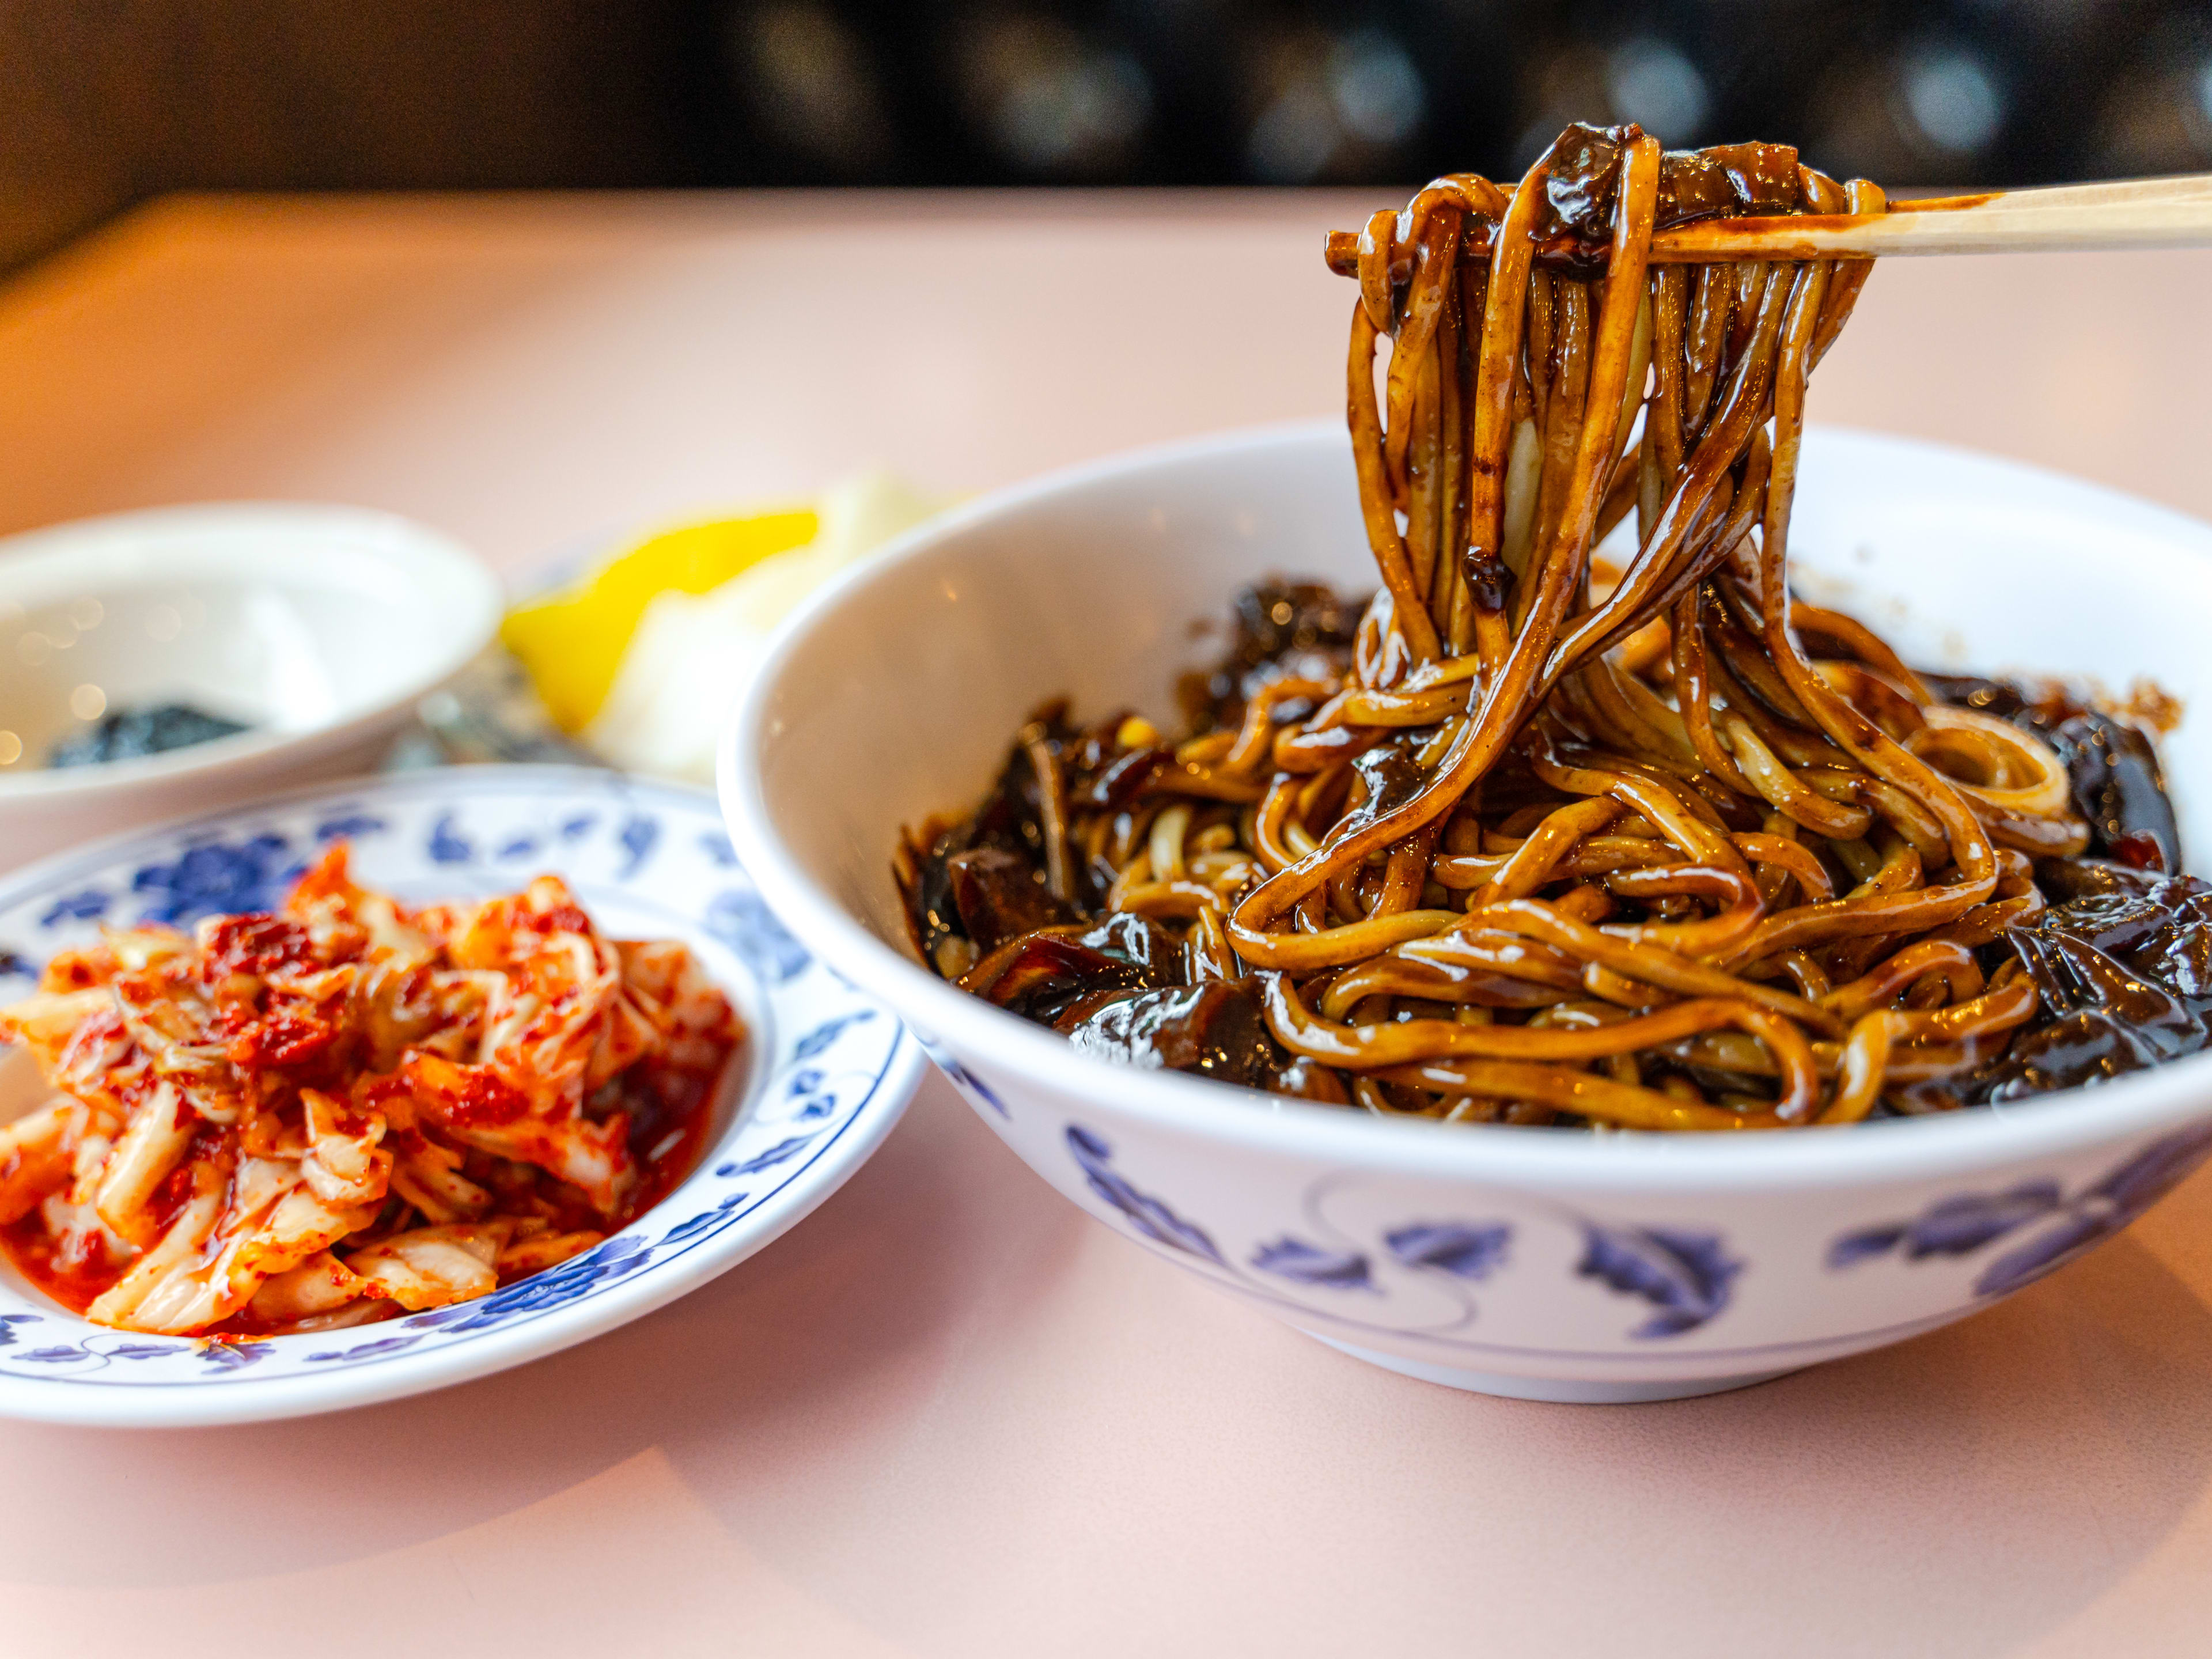 A bowl of jjajangmyeon with a side of kimchi.